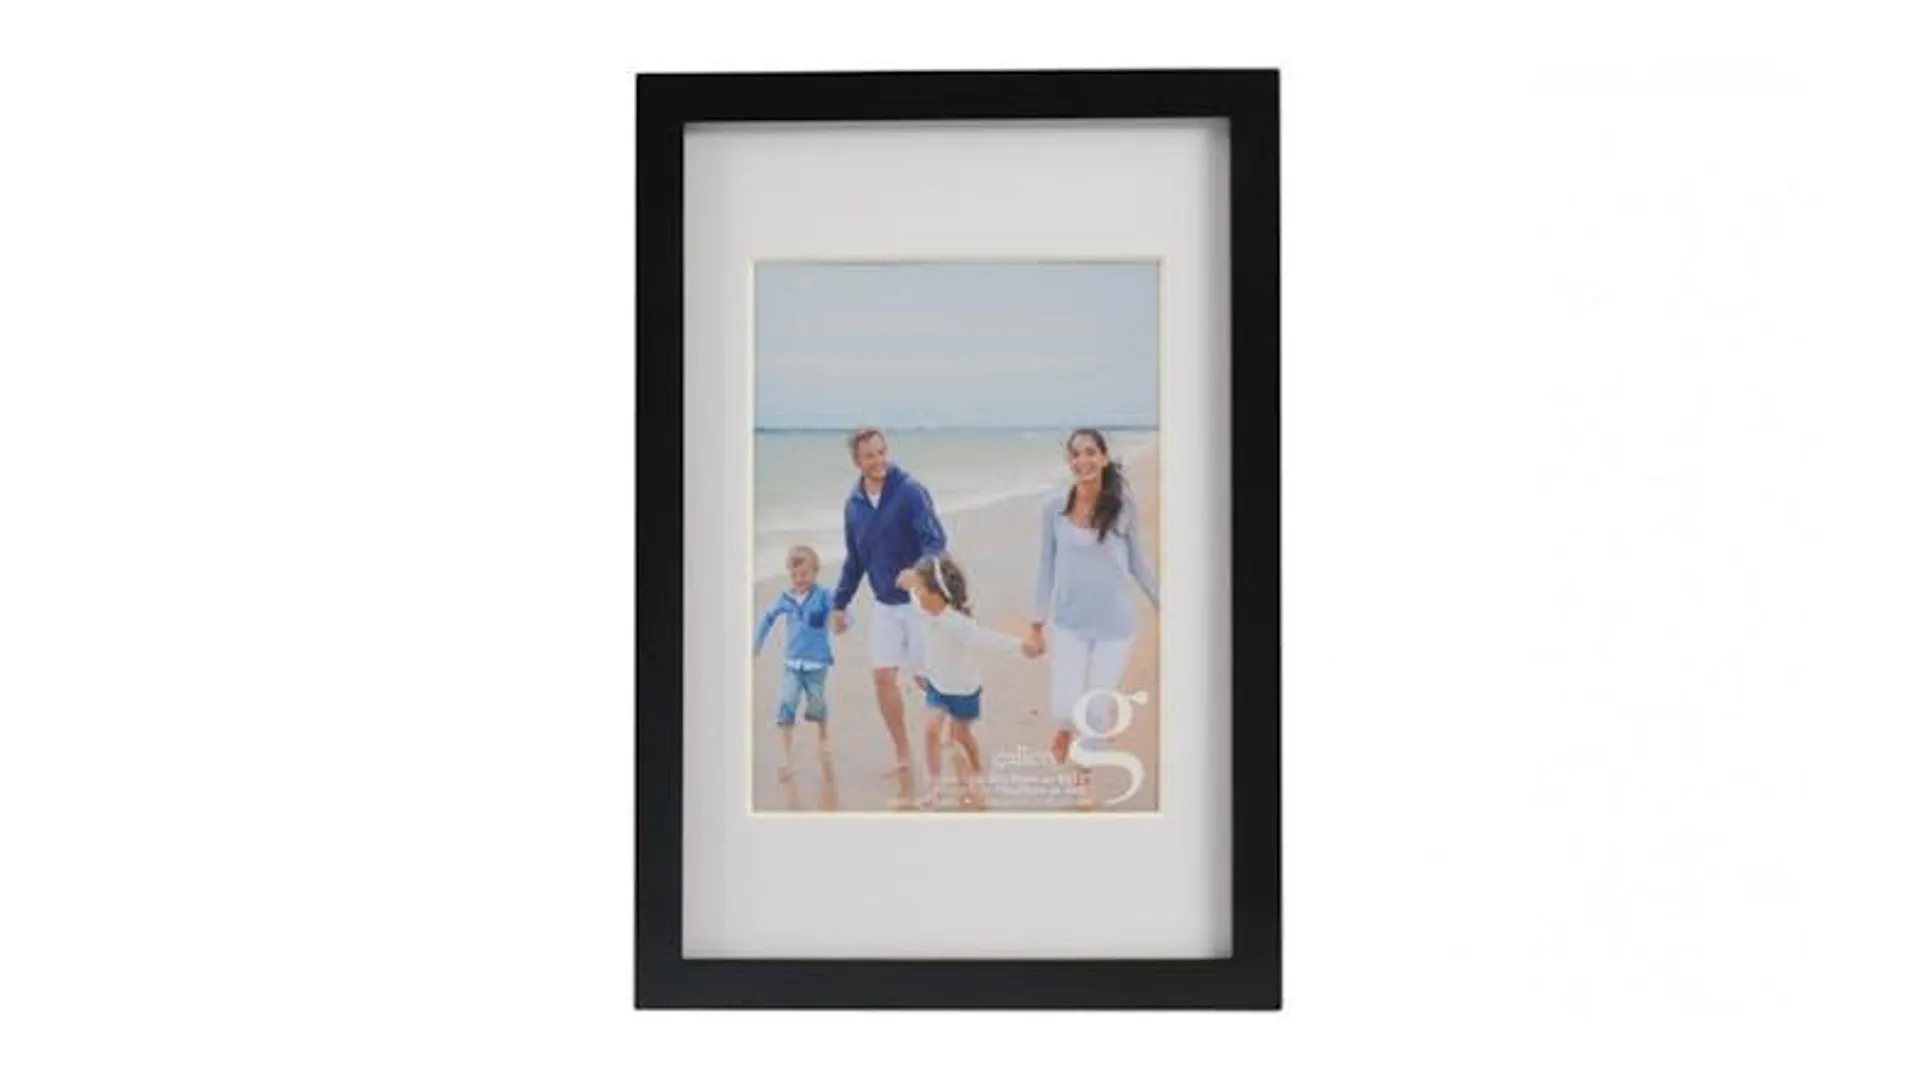 UR1 Gallery 8x12 Photo Frame with 6x8 Opening - Black